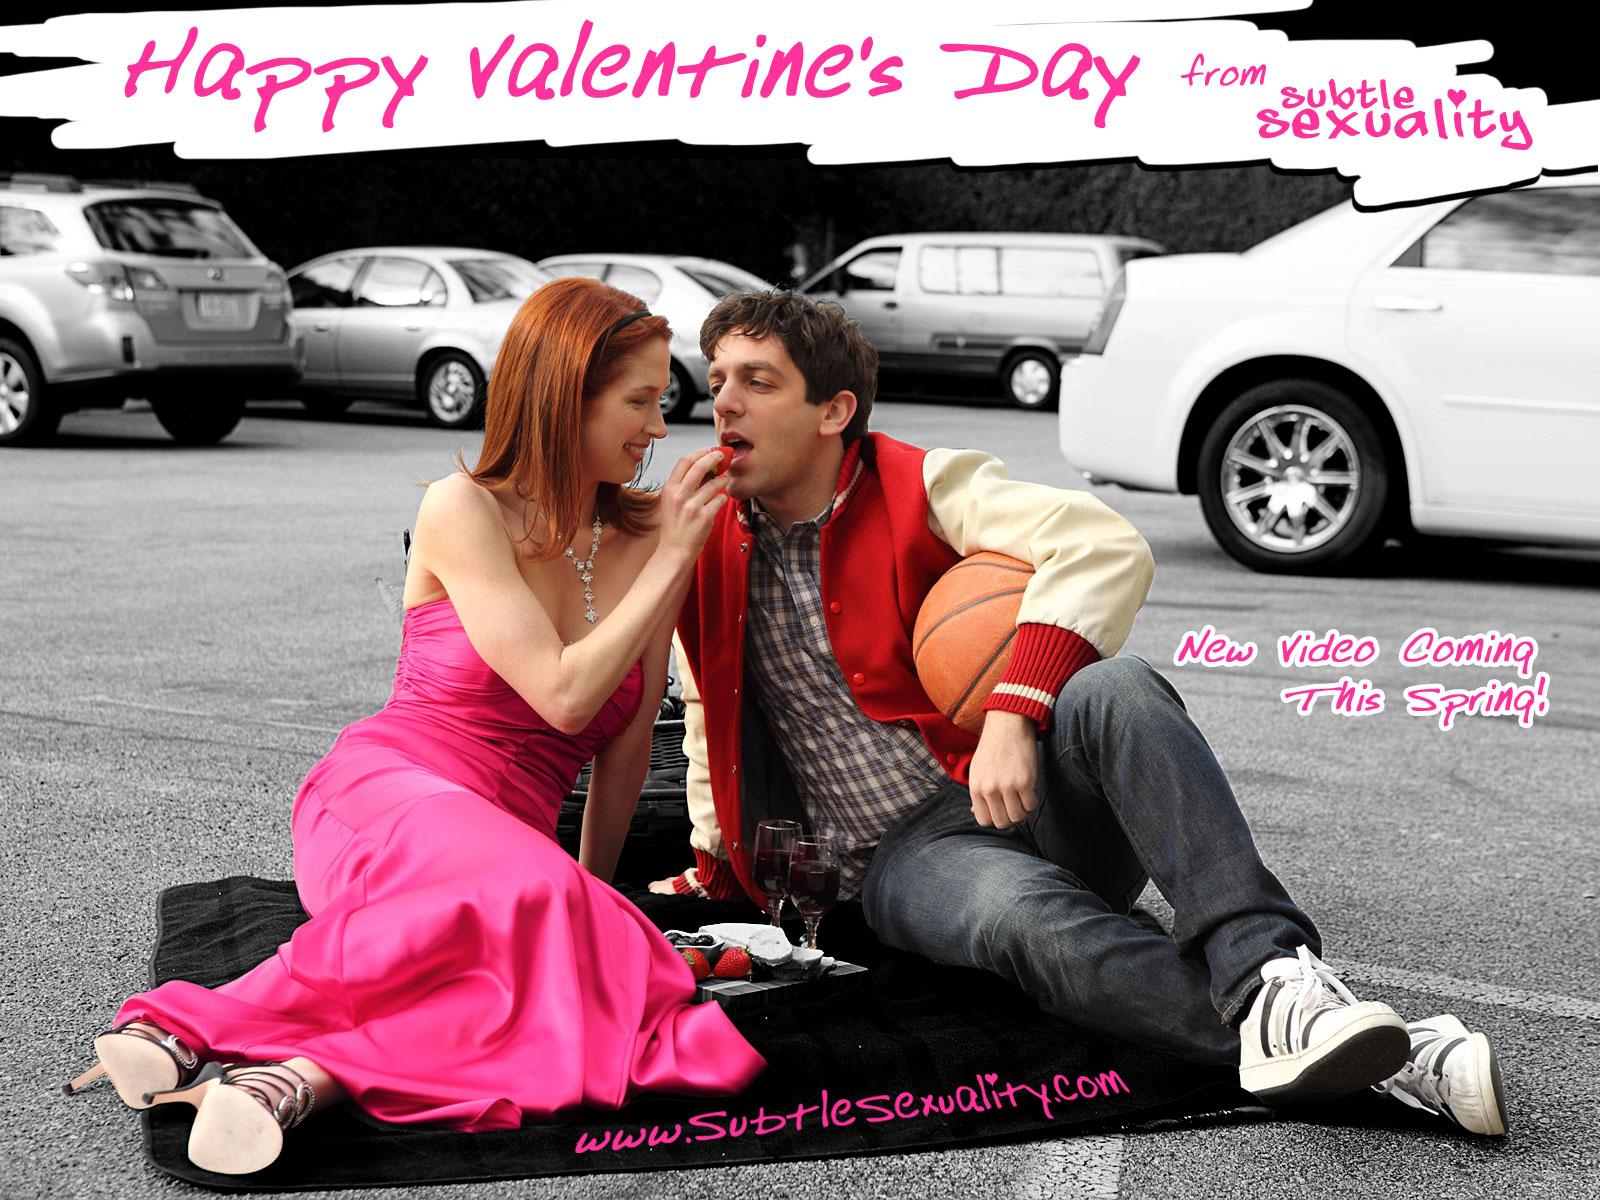 The Office Valentine's Day wallpaper • OfficeTally